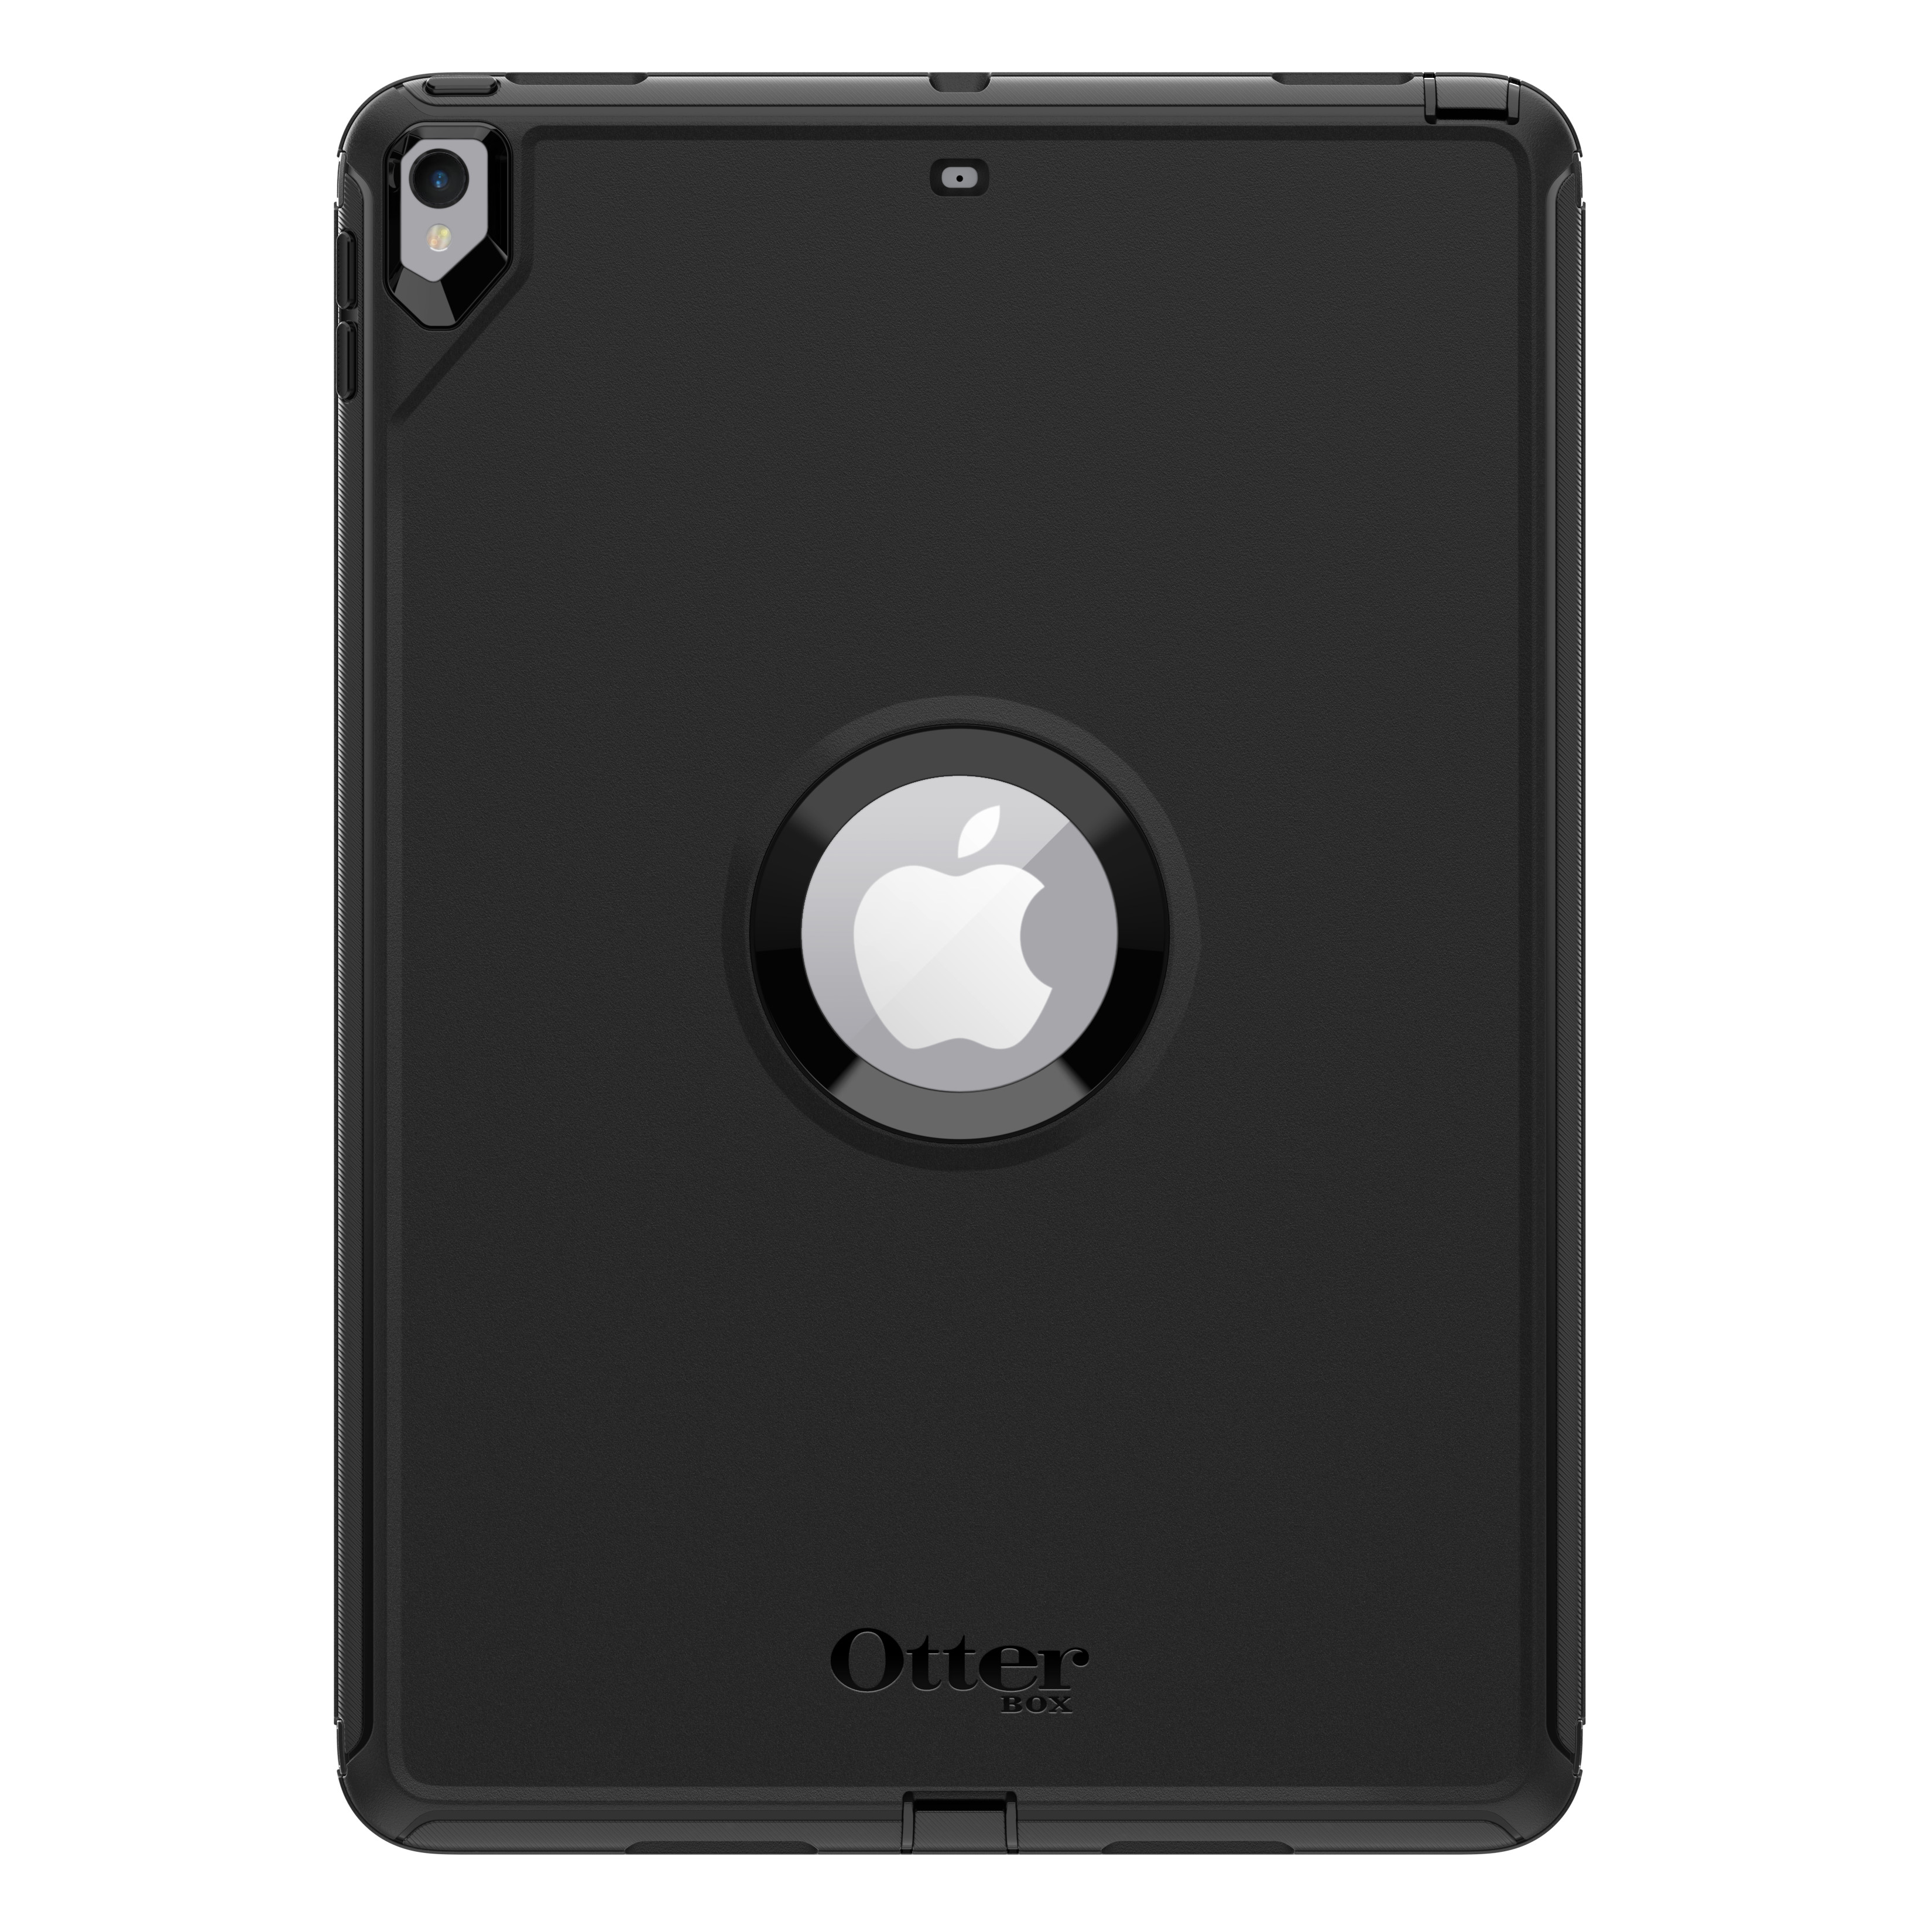 Otterbox - Defender Tablet Case for iPad Pro 10.5/Air (3rd gen), Black - image 2 of 10